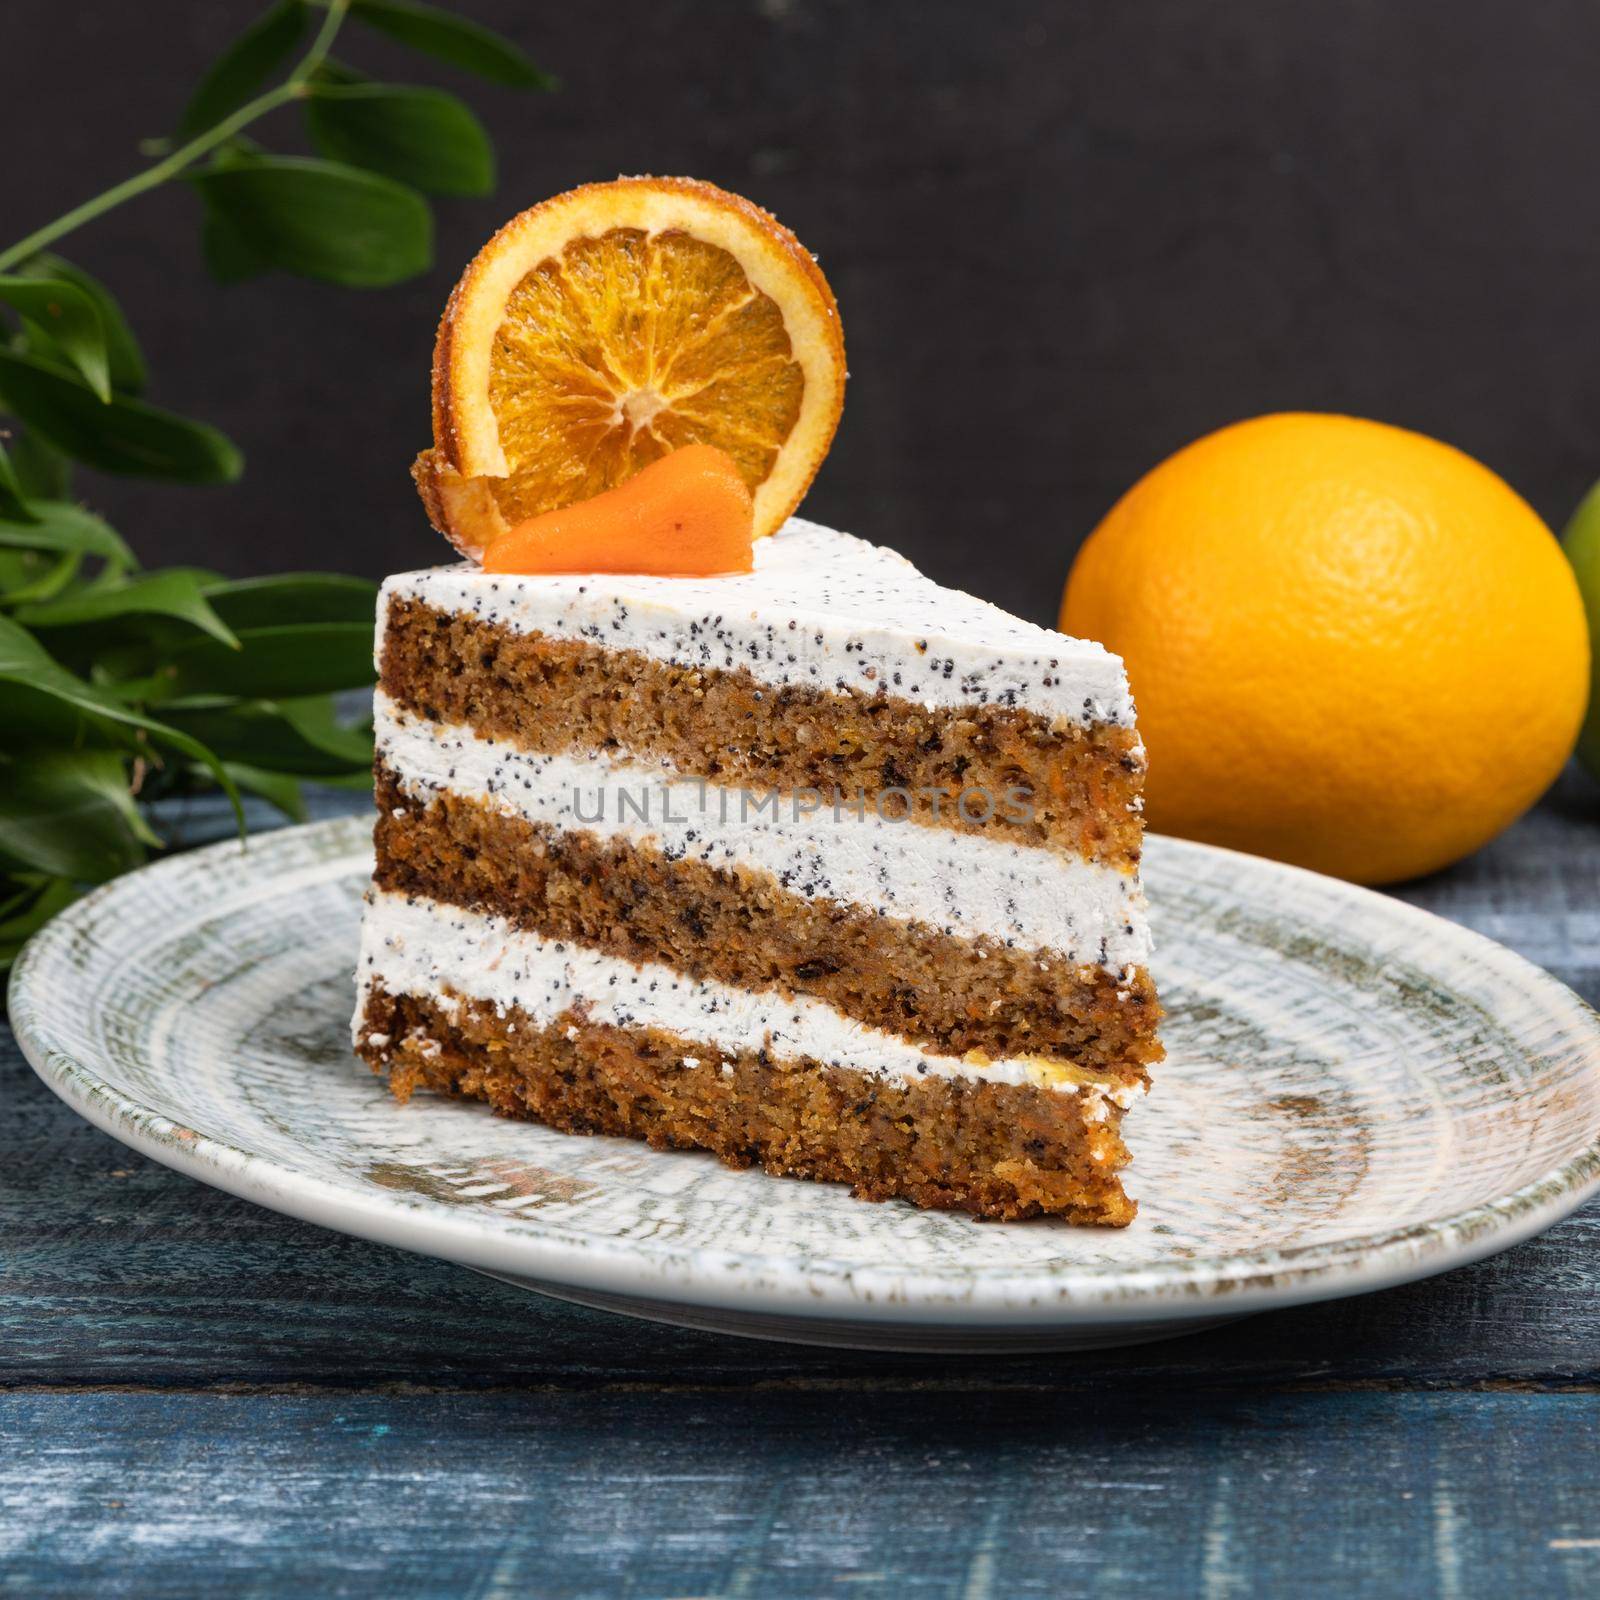 Tasty lemon cake with leaves by ferhad